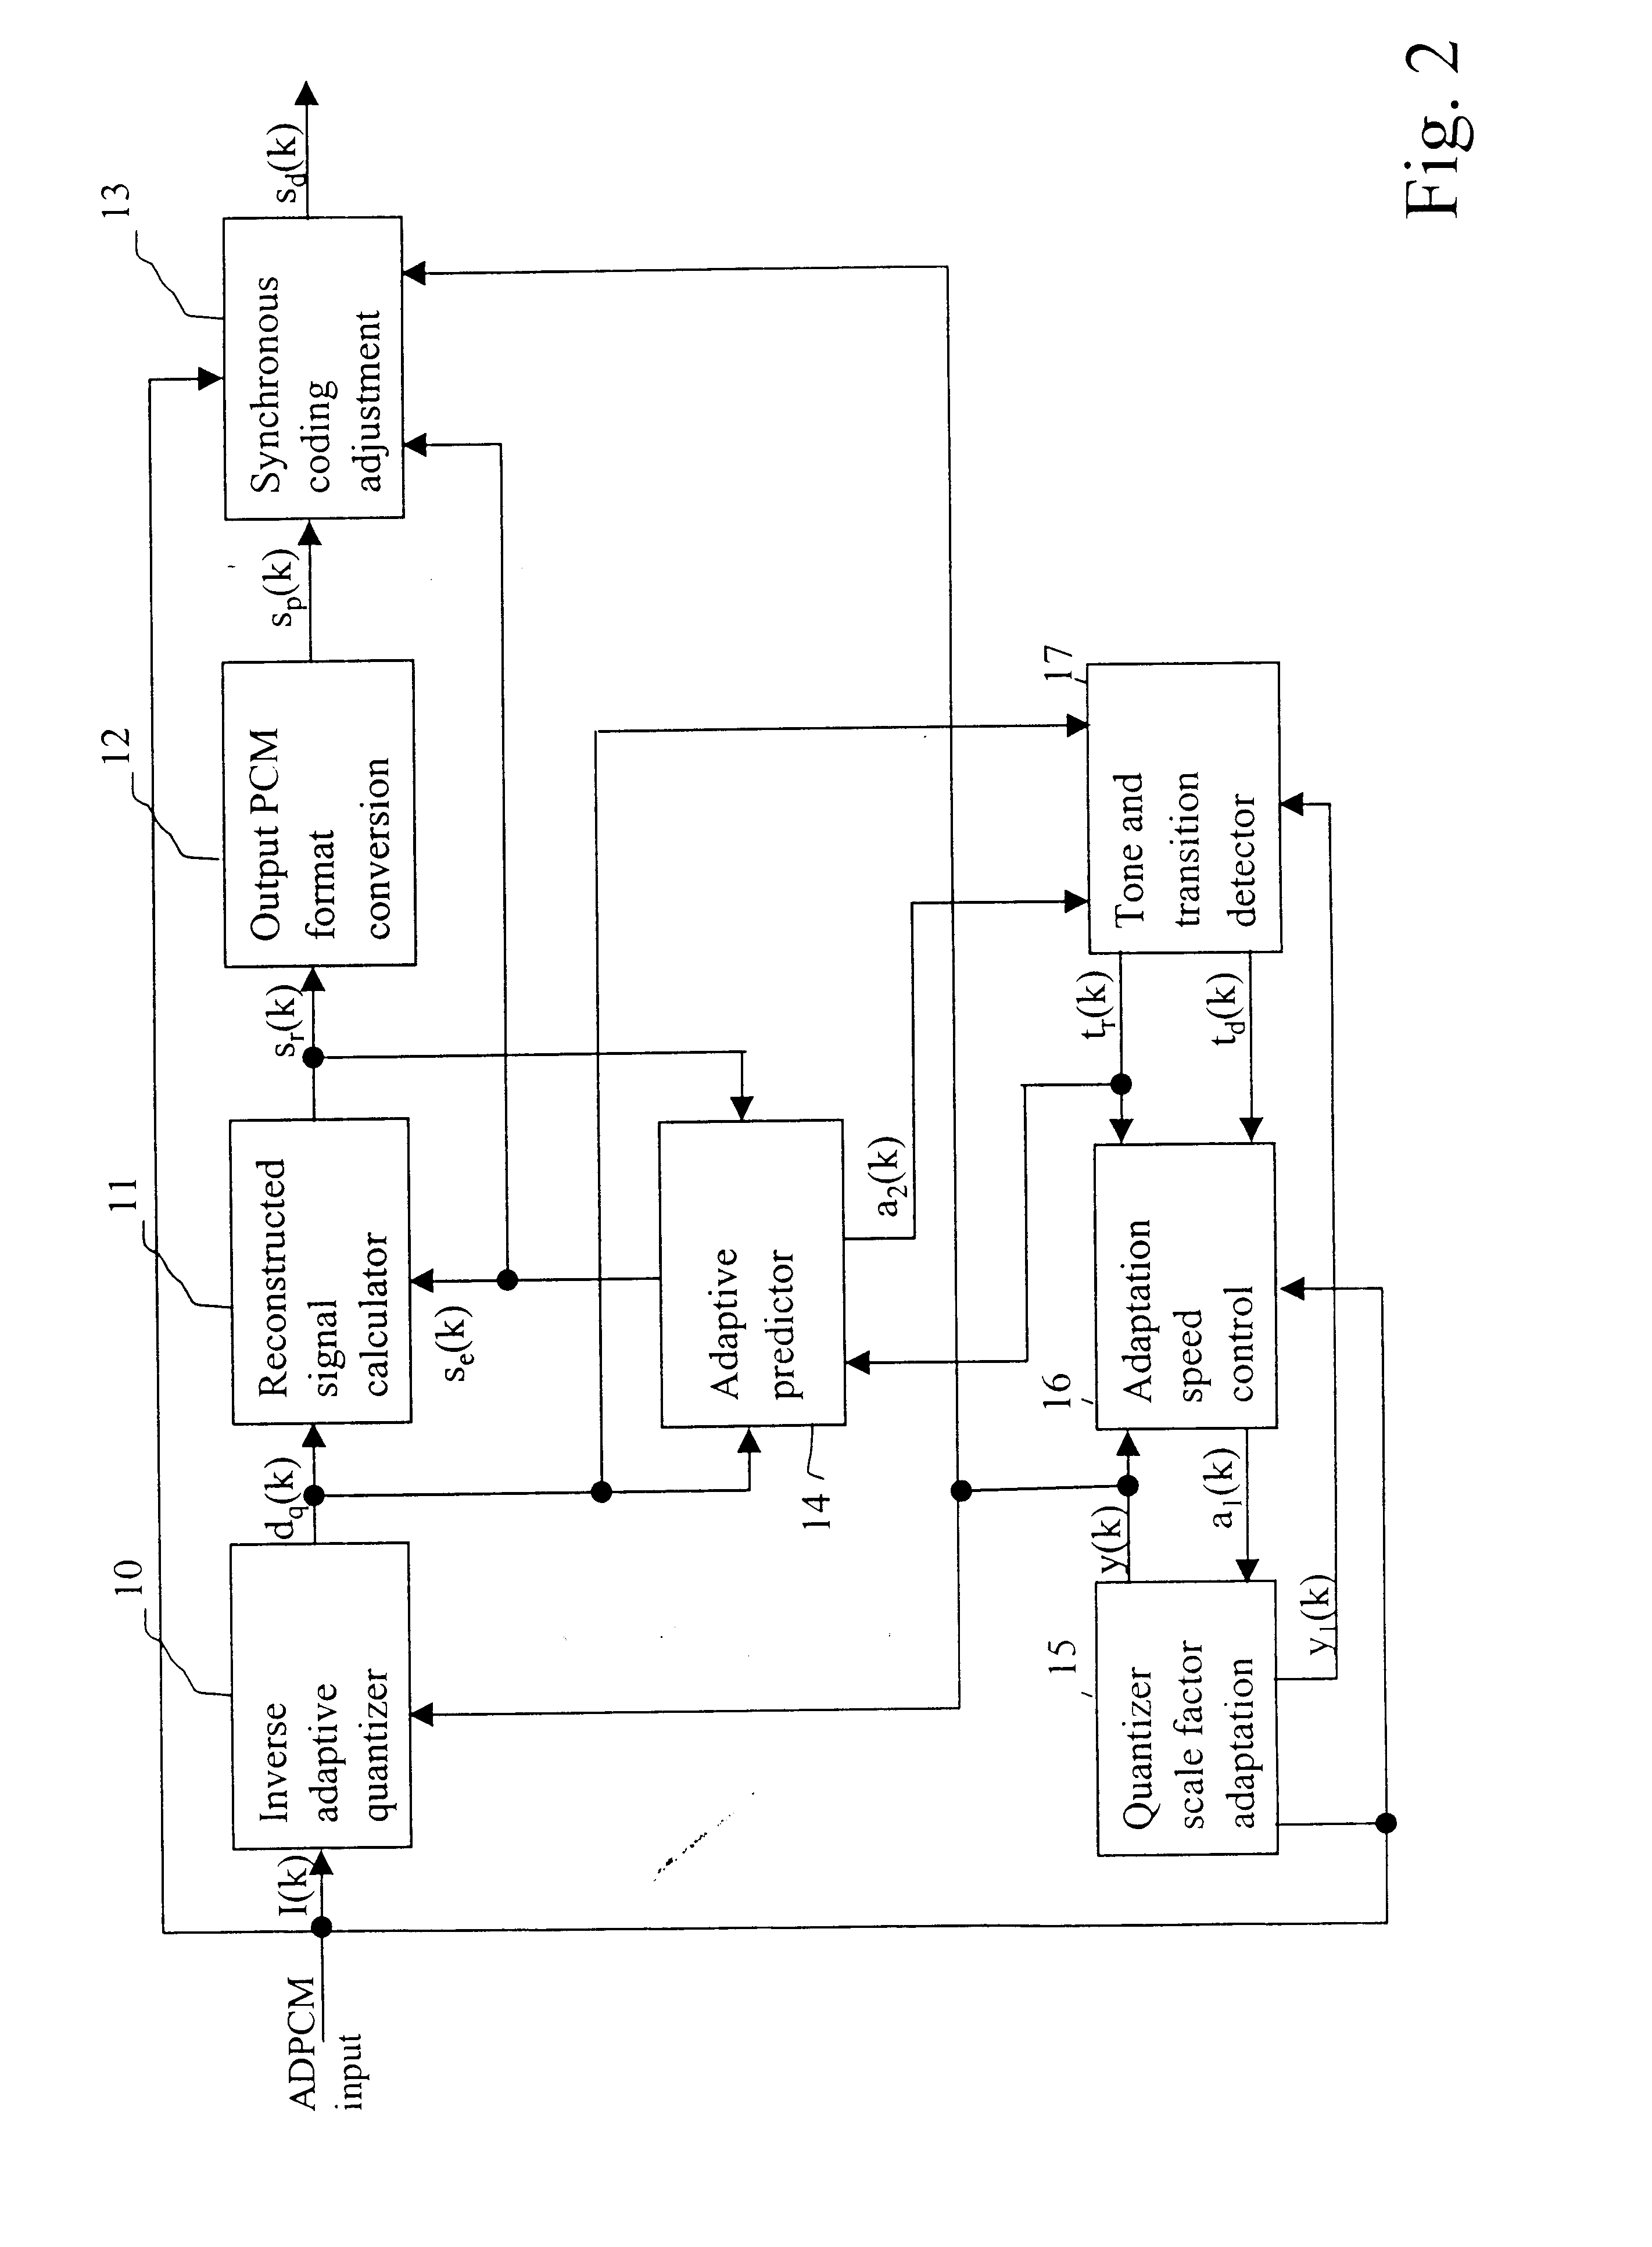 Error recovery method and apparatus for ADPCM encoded speech